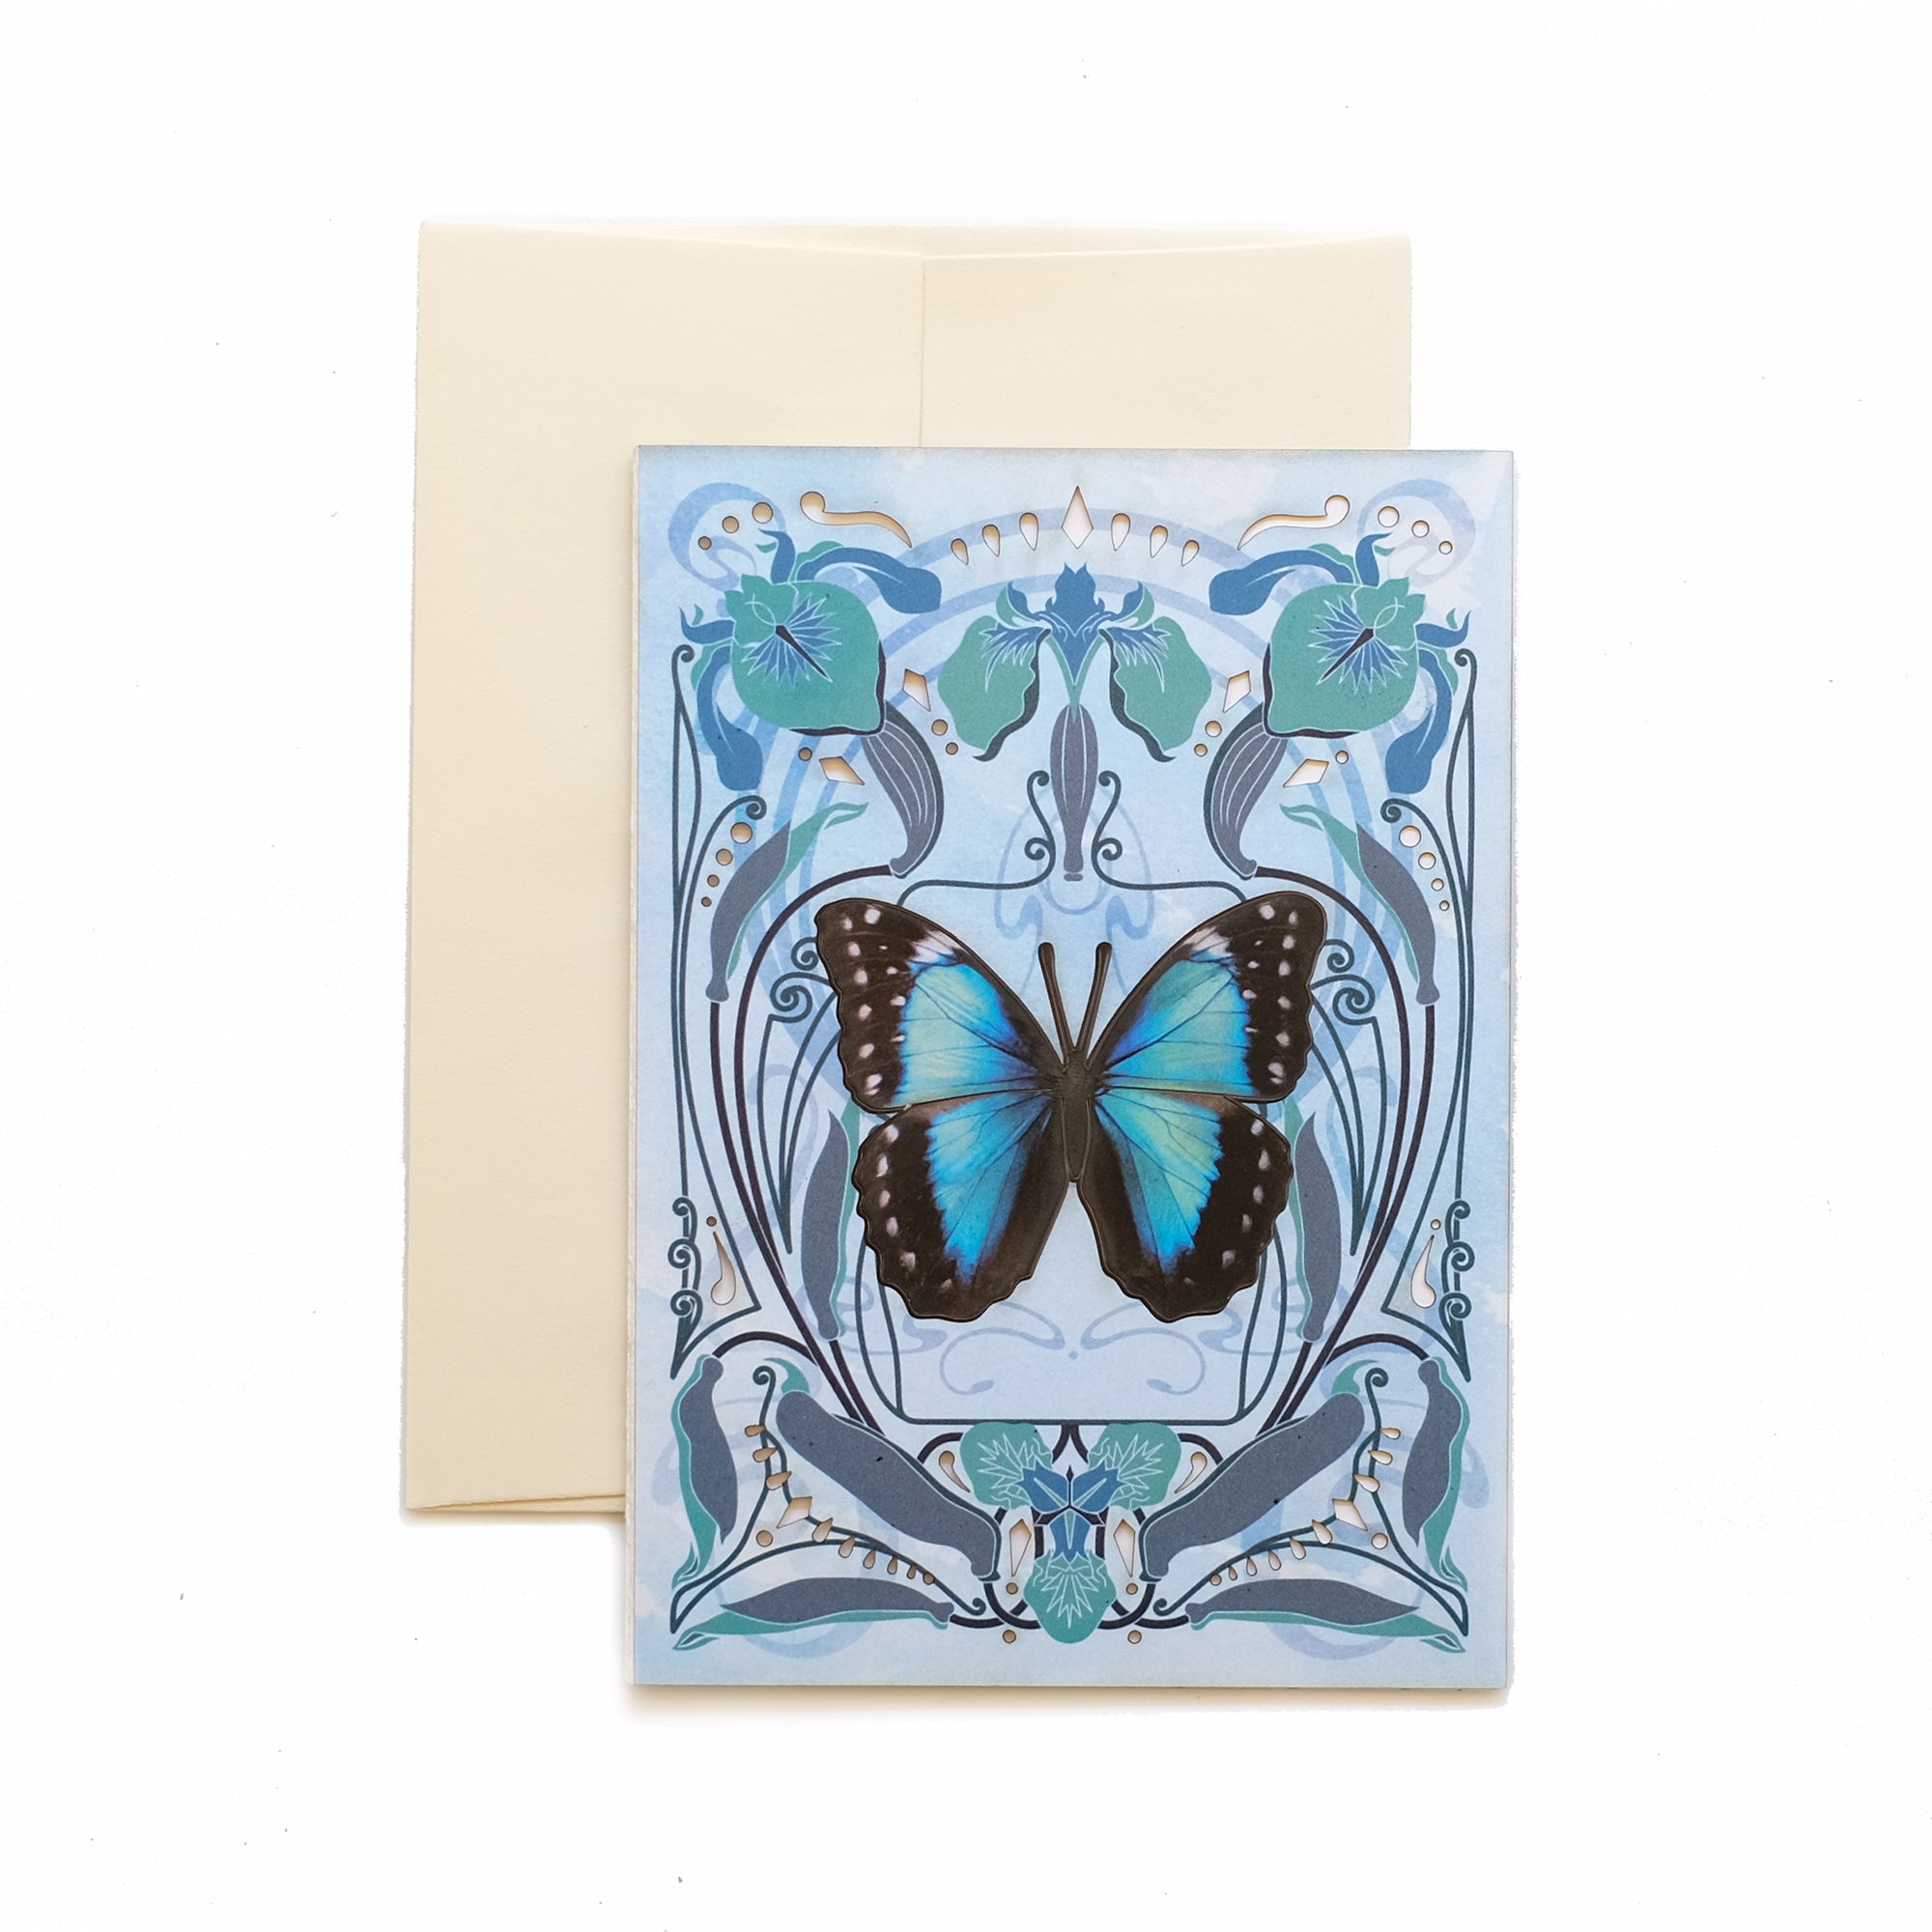 Teal Morpho Butterfly 'Pop-Out' Greeting Card - Set of 4 - Reseller Wholesale